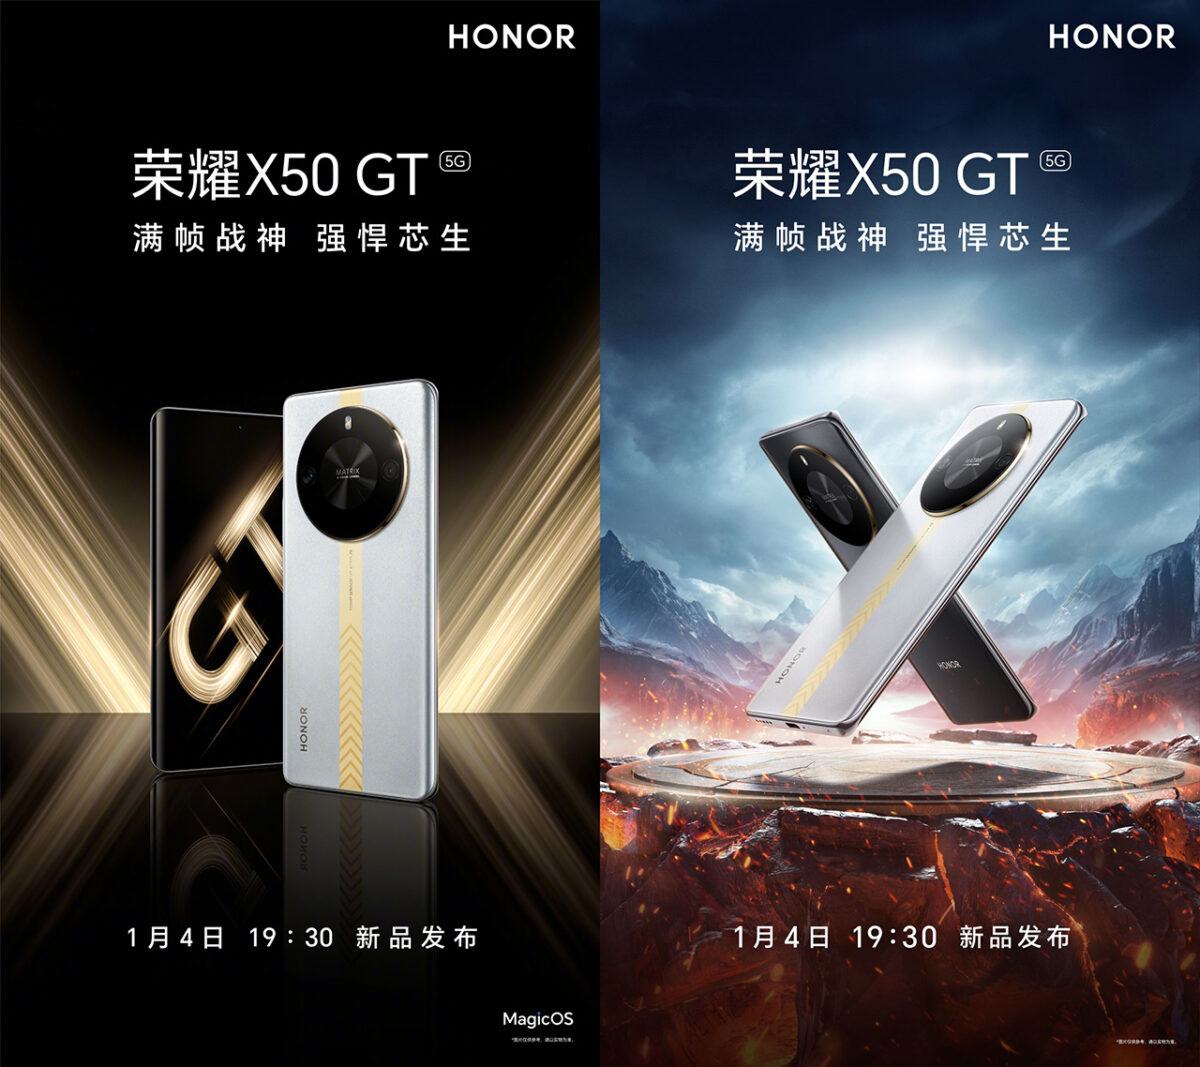 honor x50 gt